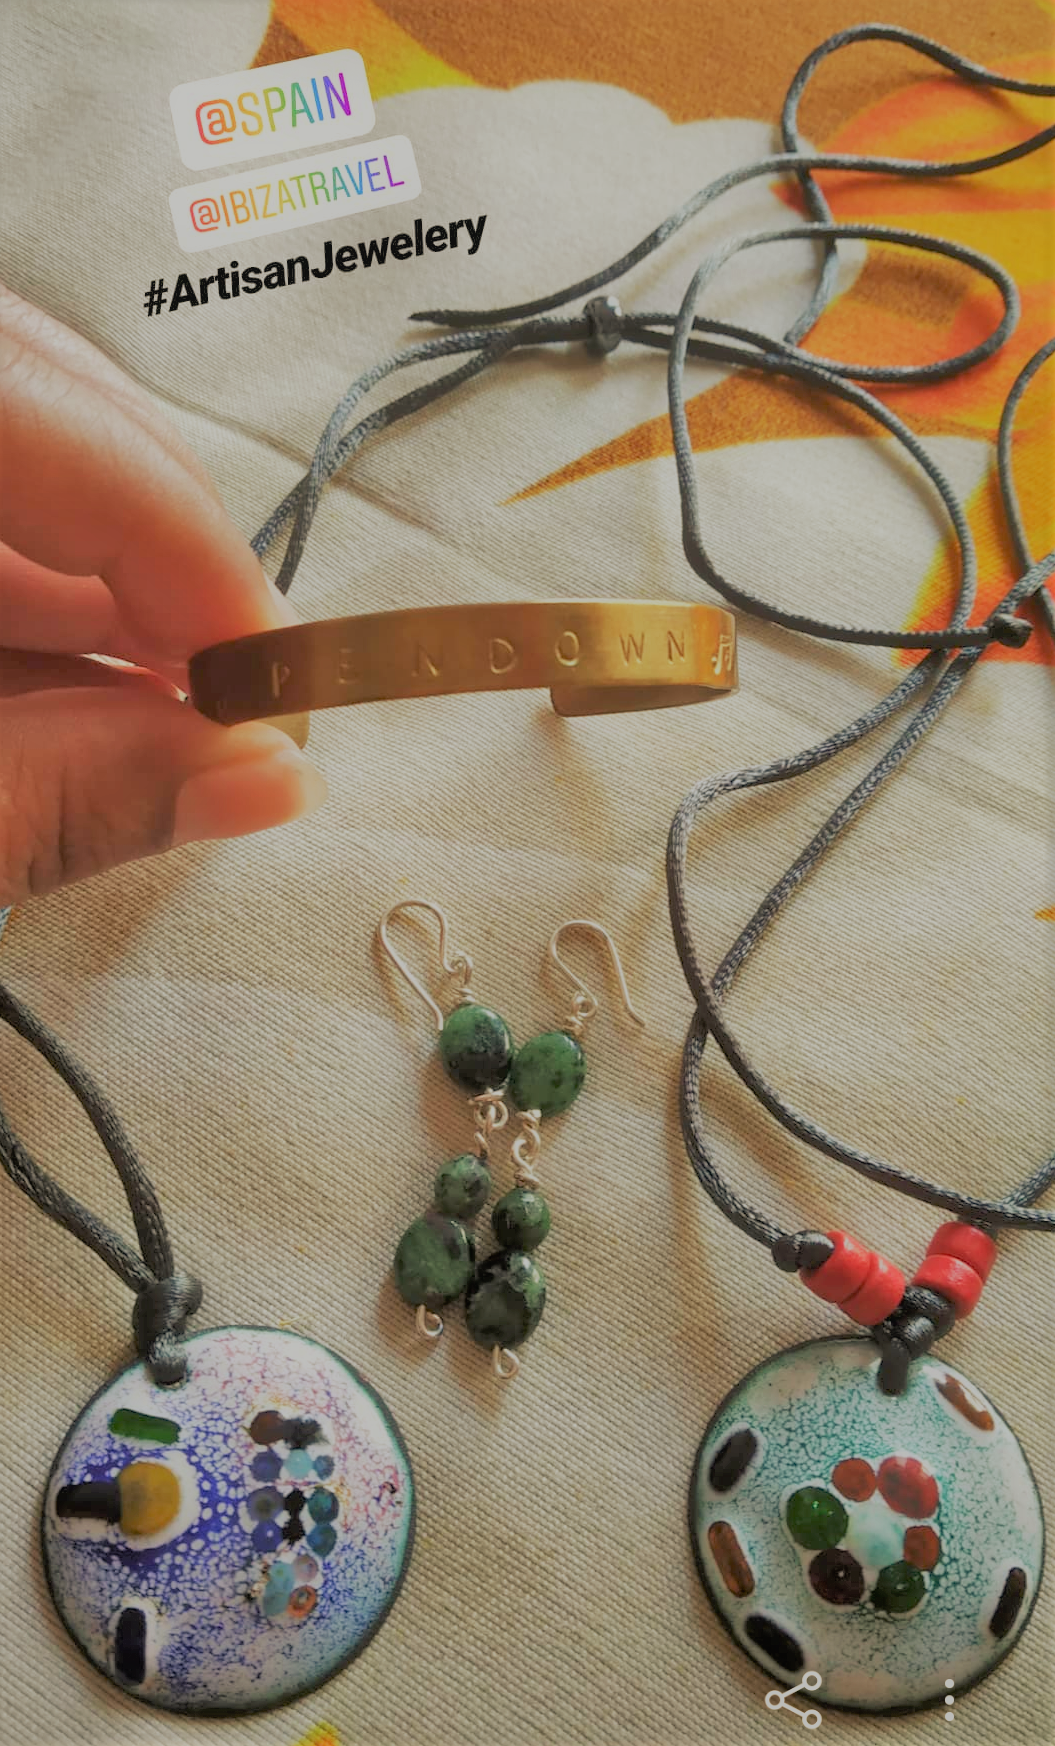 Workshop with Local Artisans: I made Bespoke Jewellery in Ibiza.